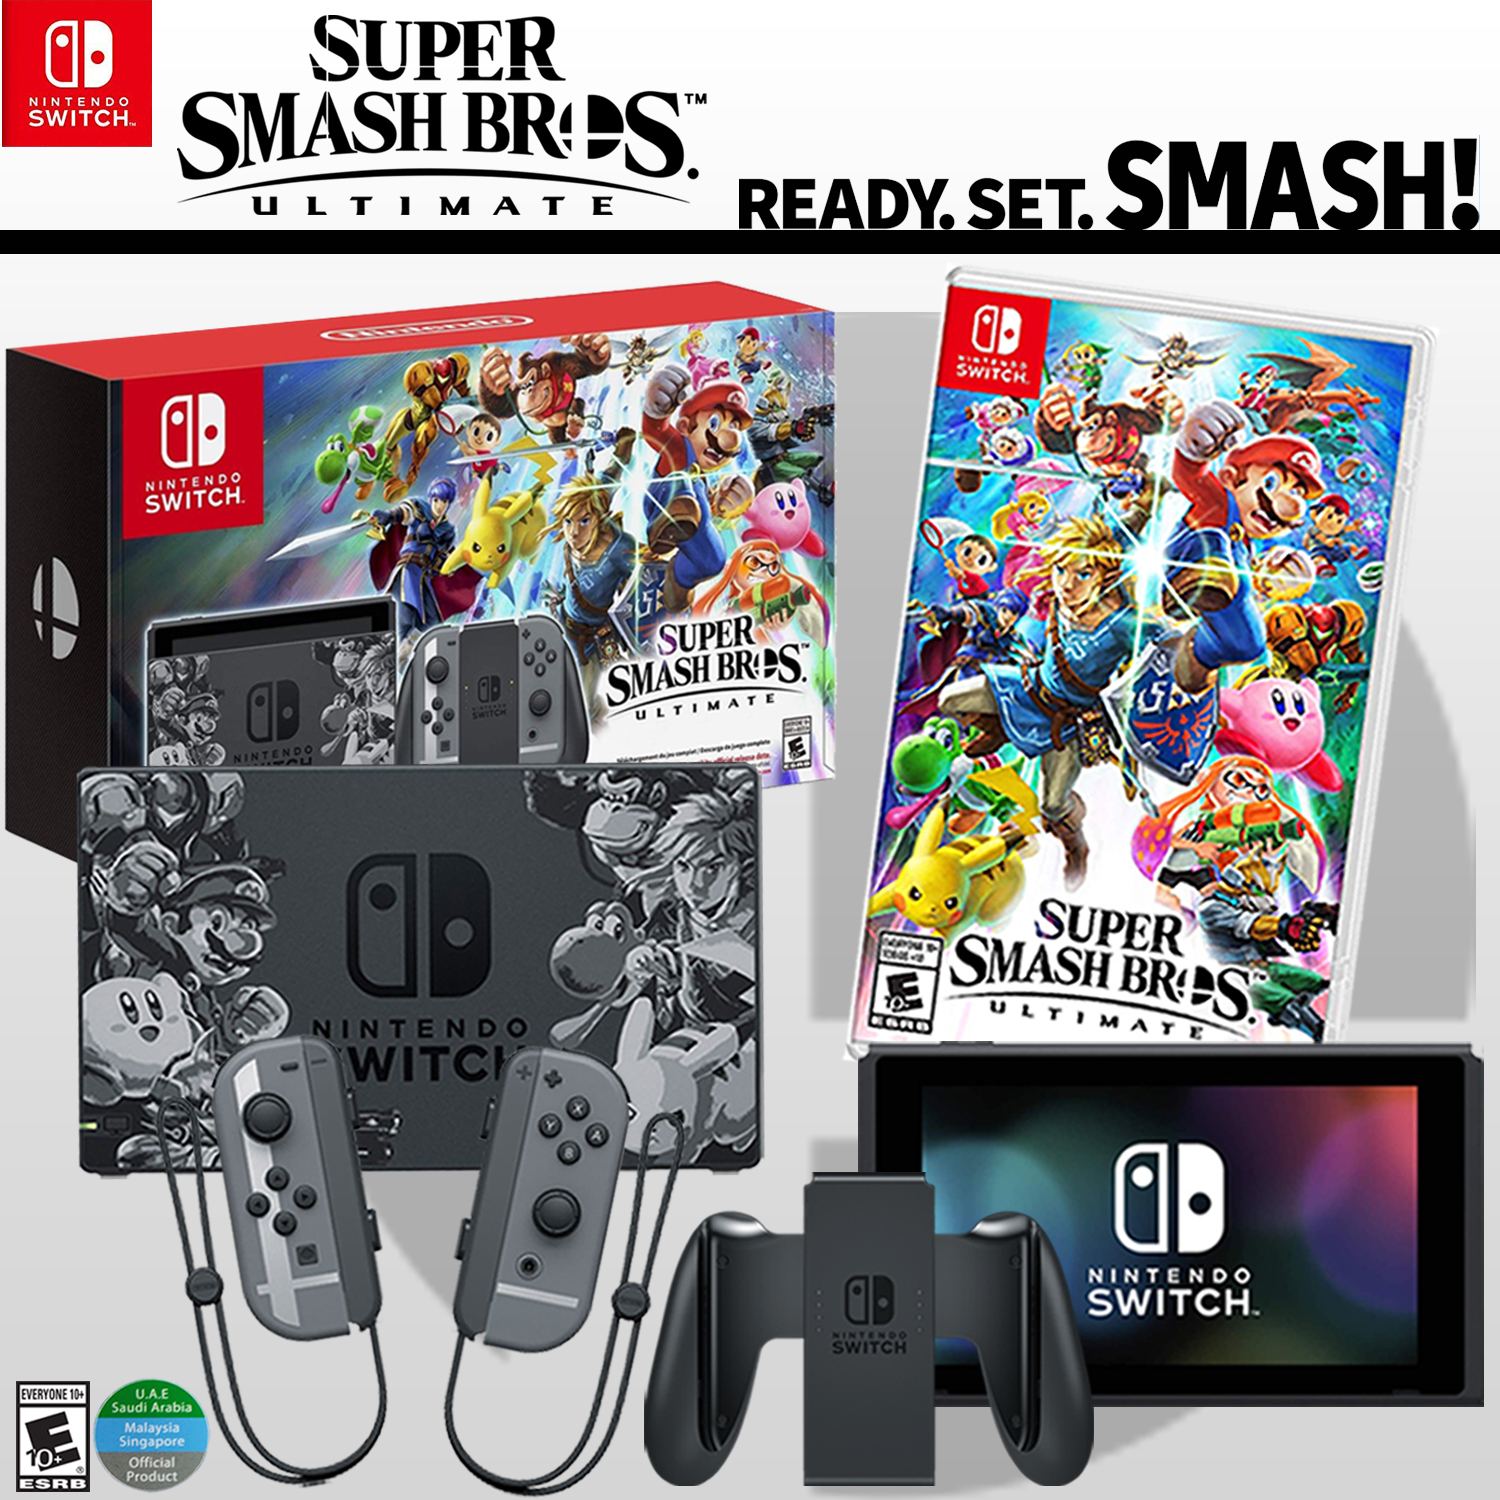 Nintendo Switch Super Smash Edition] Bros. Set [Limited Special Ultimate